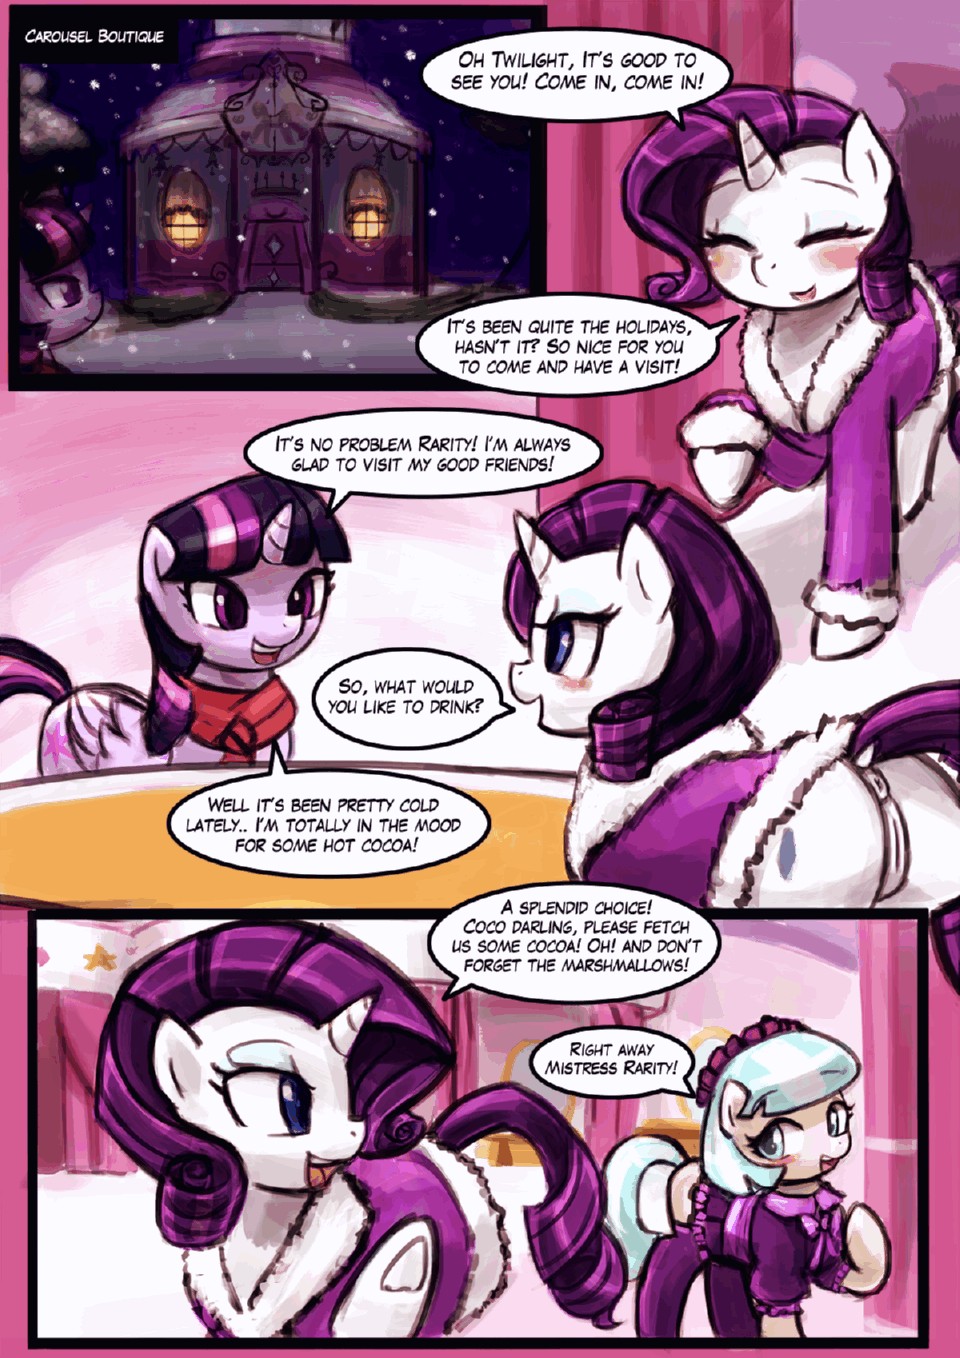 Hot Cocoa with Marshmallows porn comic page 002